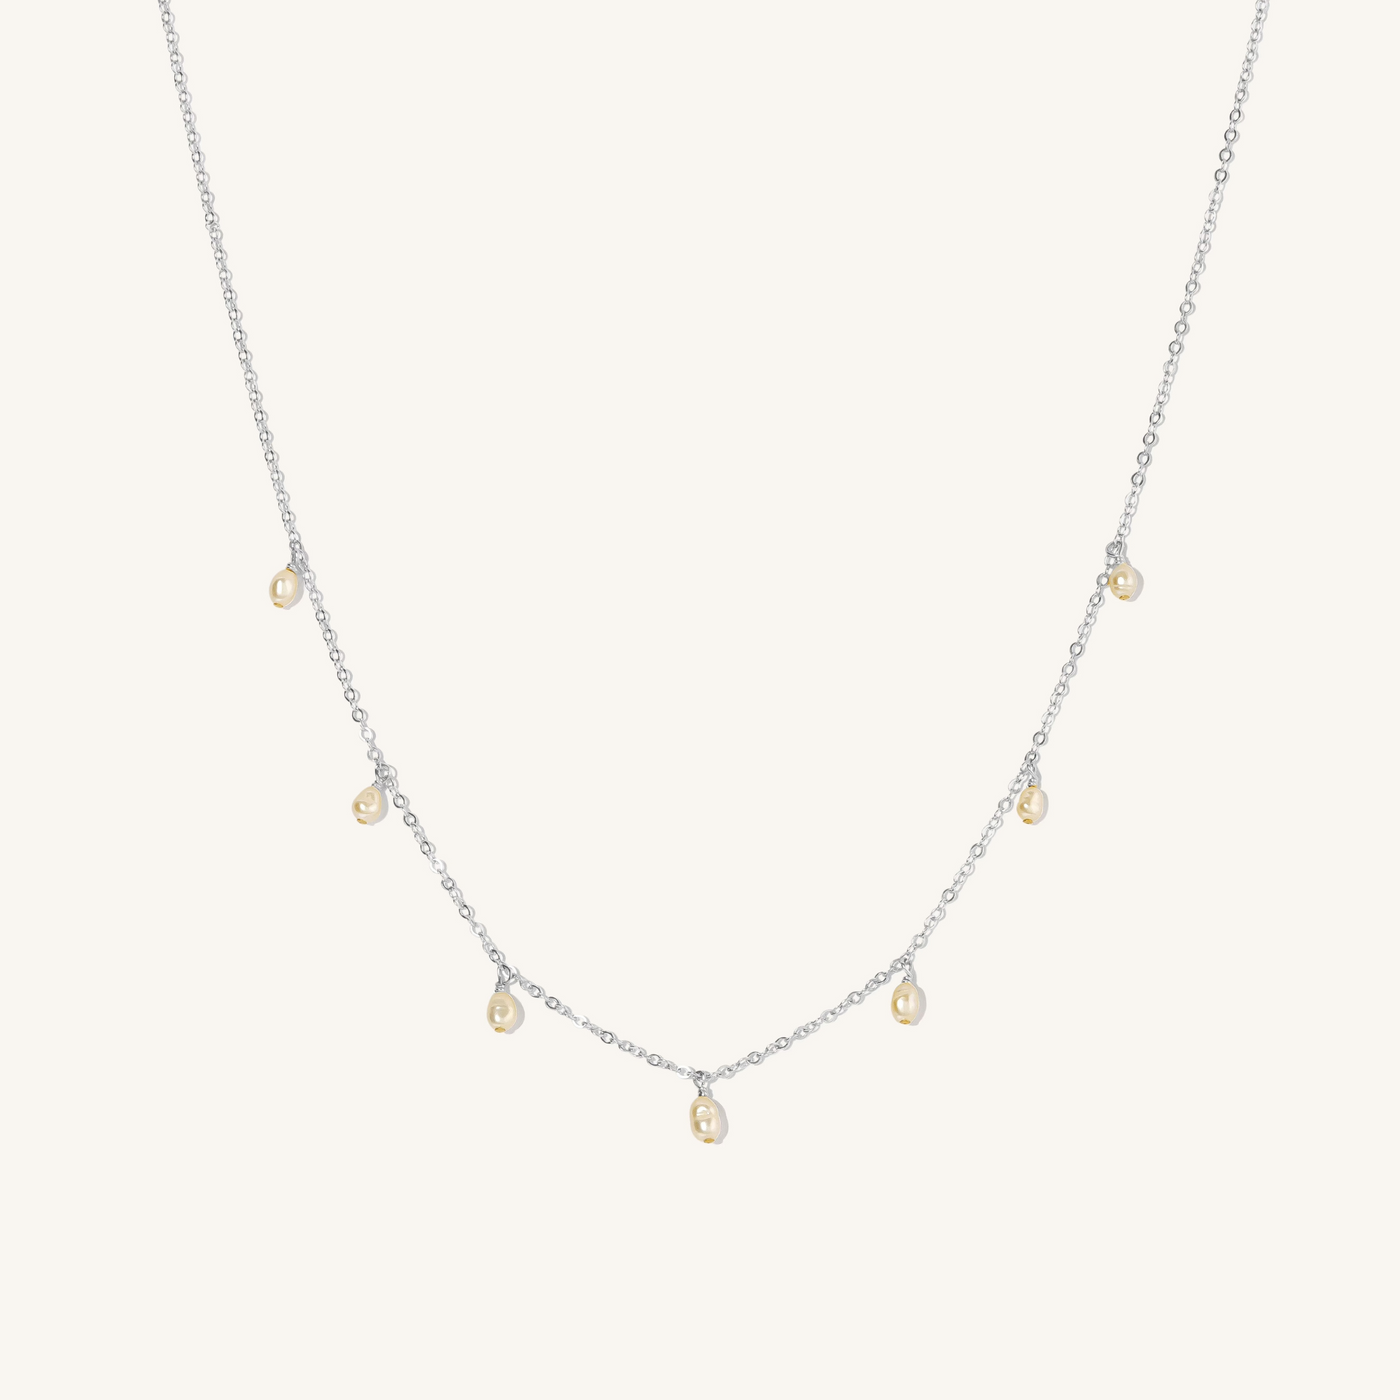 Dangling Pearl Necklace | Simple & Dainty Jewelry